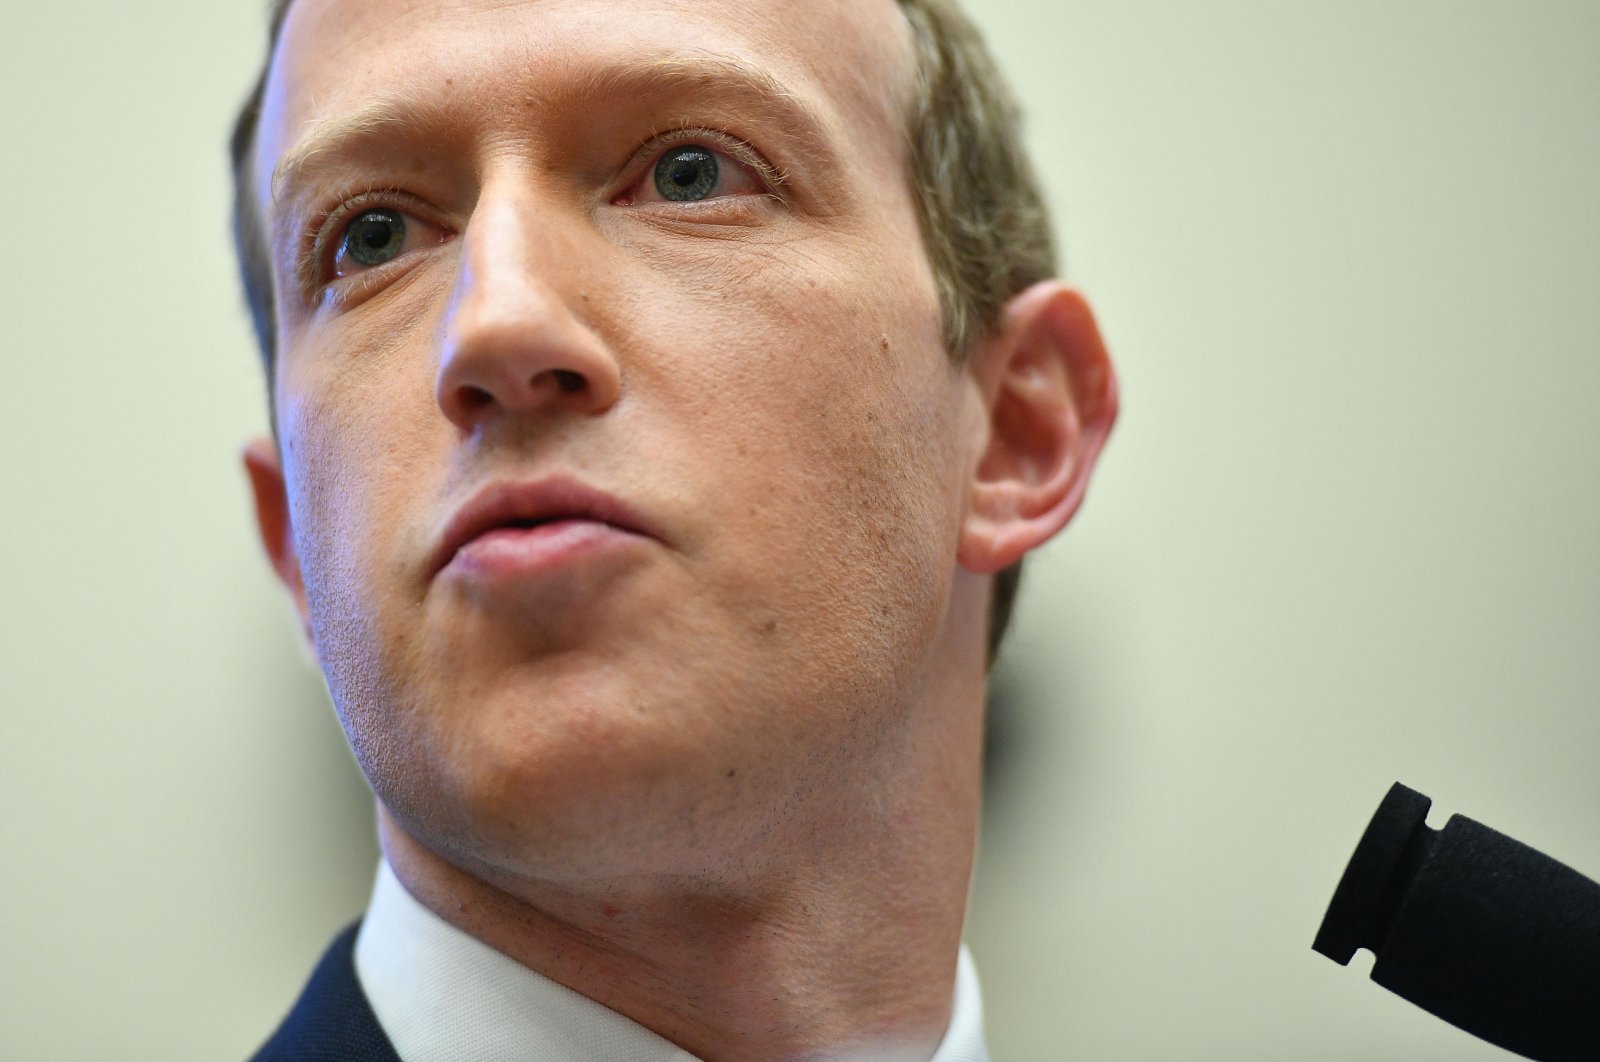 Facebook Chairperson and CEO Mark Zuckerberg testifies before the House Financial Services Committee in Washington, D.C., U.S., Oct. 23, 2019. (AFP Photo)